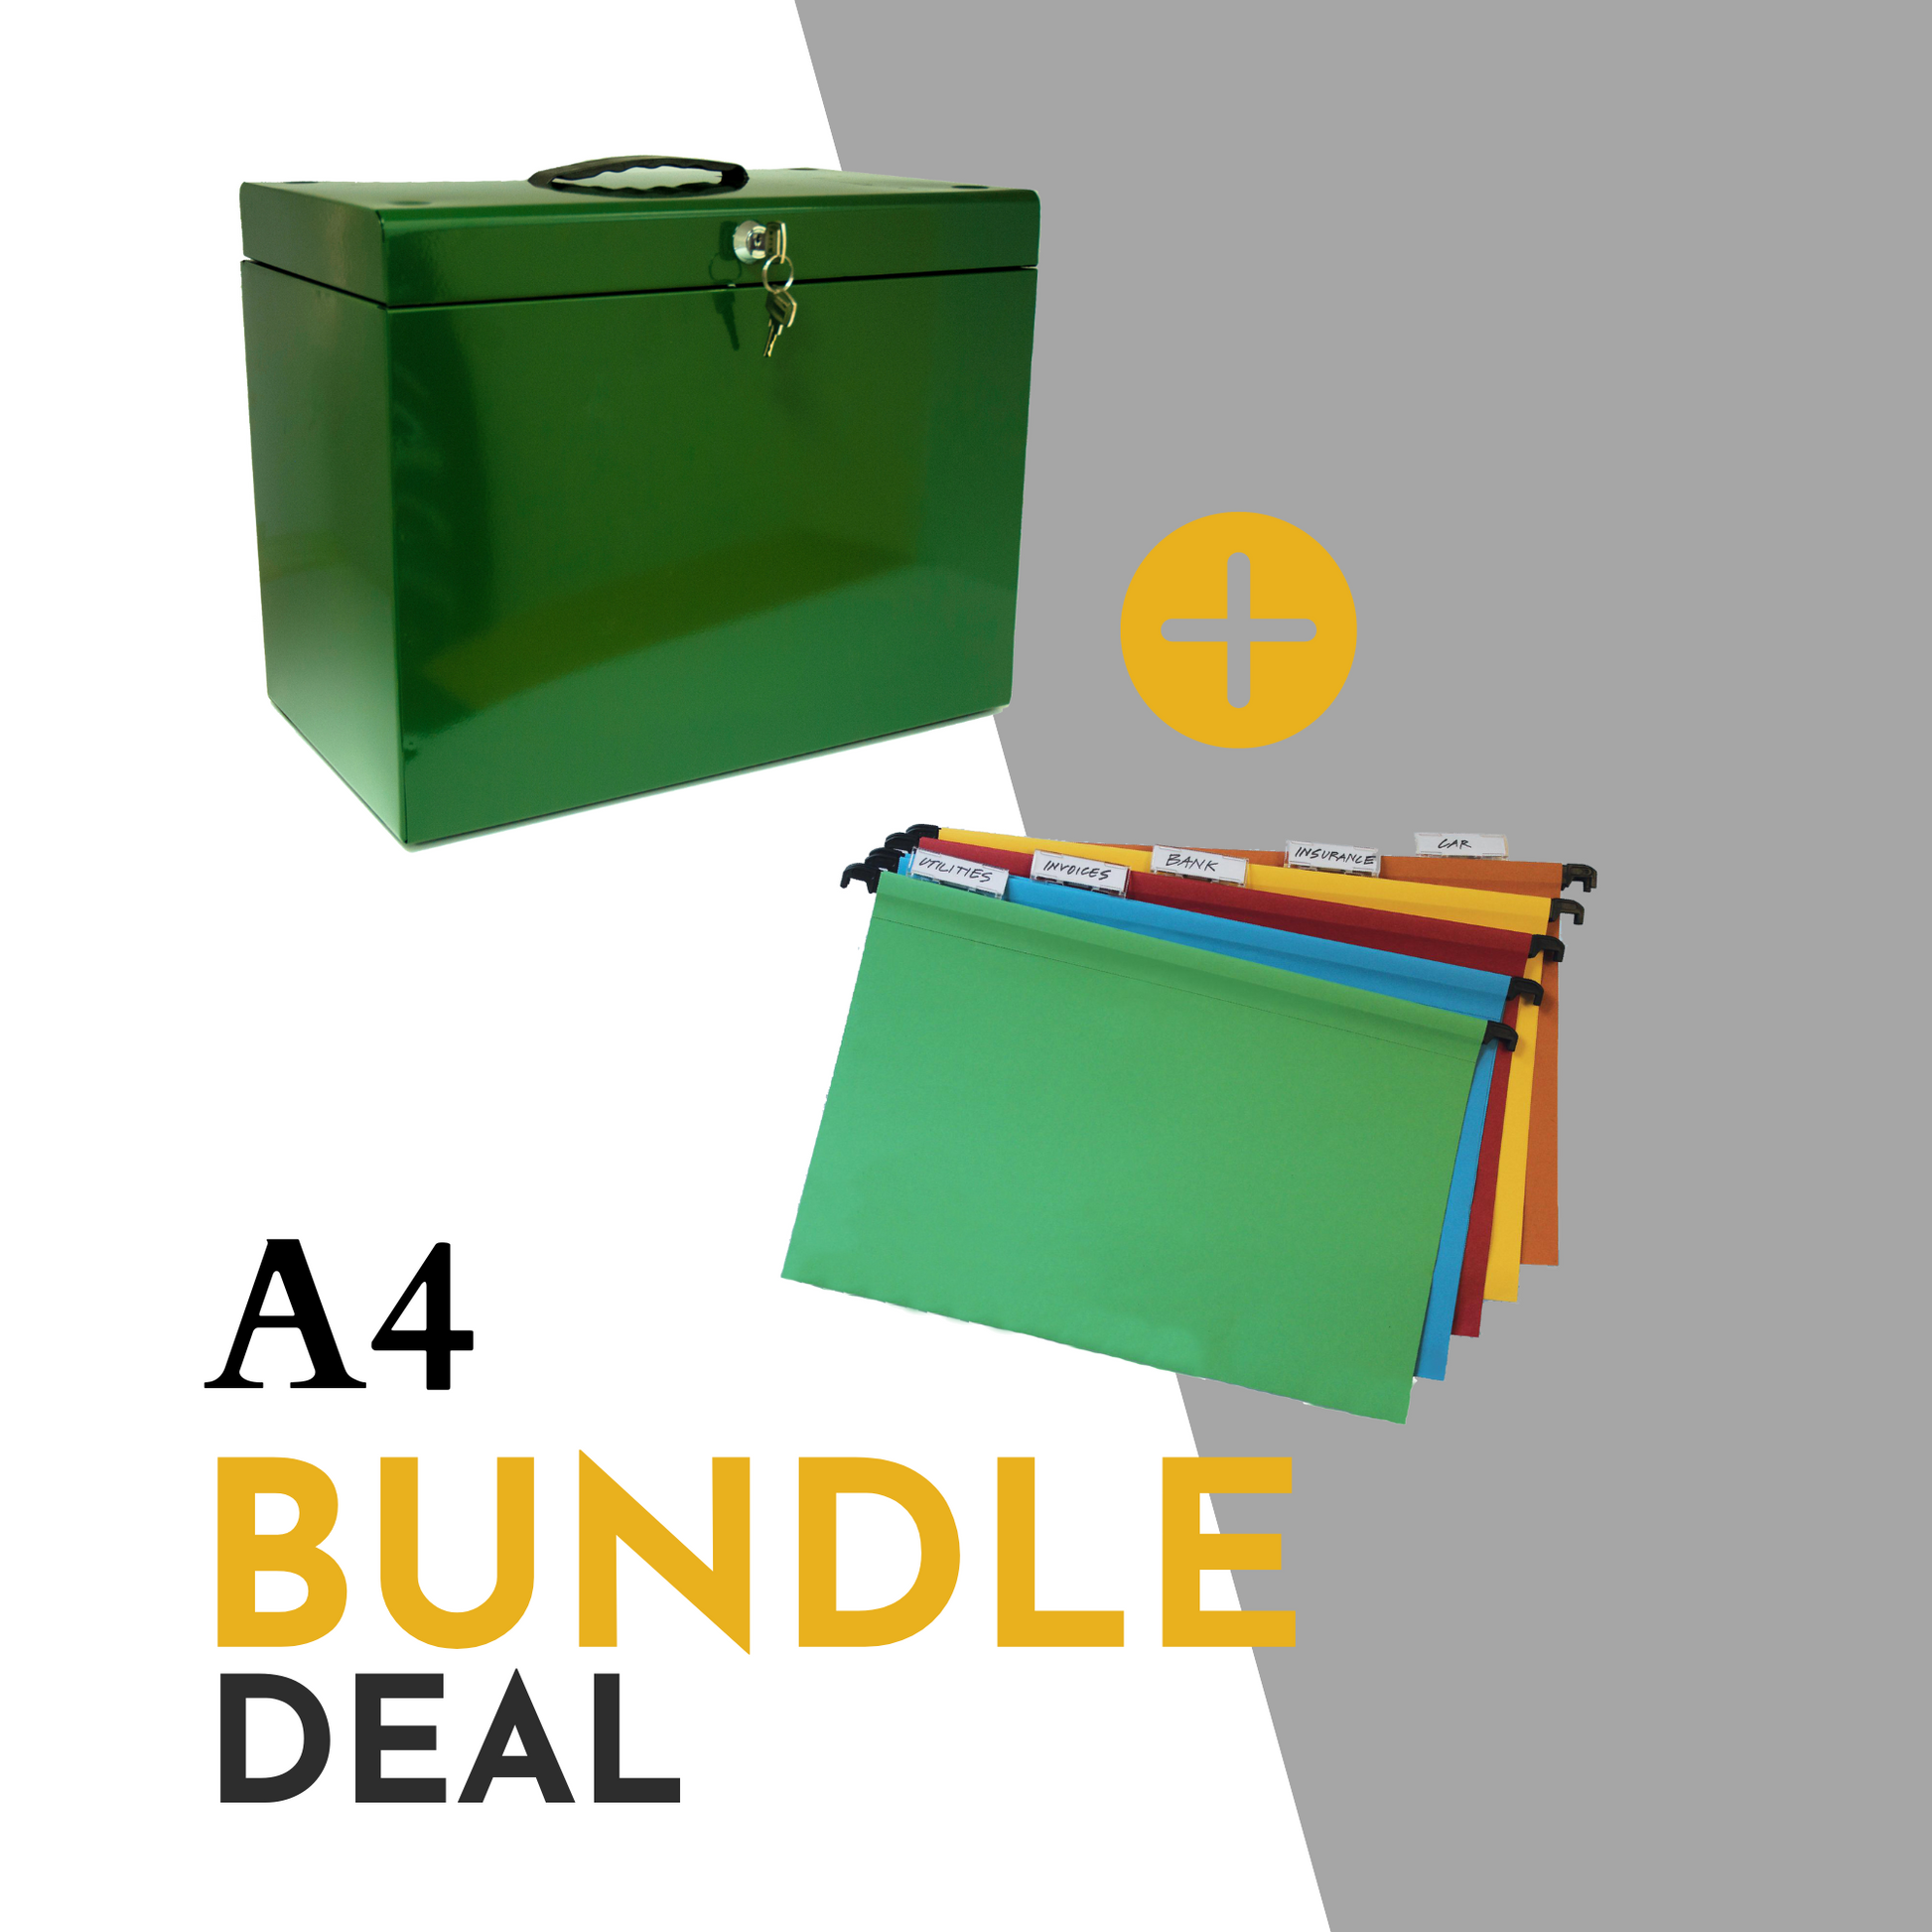 Promotional image for an A4 file storage bundle deal, including a British racing green file box with a handle and key lock, plus an additional set of 10 assorted color A4 suspension files with index tabs, showcasing an organized filing solution.